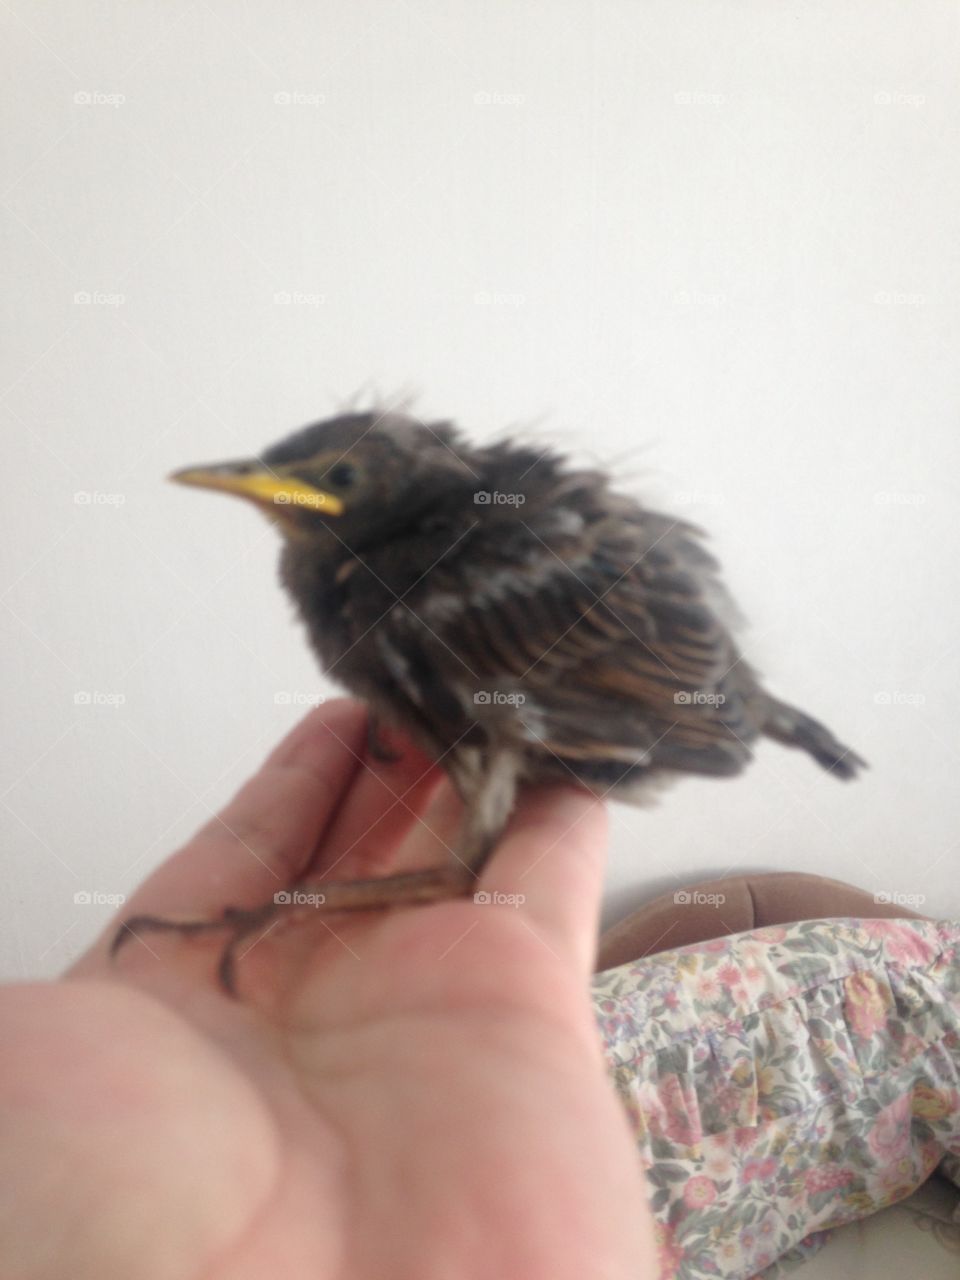 Kiki, a fledgling starling that fell out of her nest on a city street,. She couldn't be rescued by her parents (we waited to see) so we rescued her before she died of dehydration or starvation. We named her after the sounds she originally made.